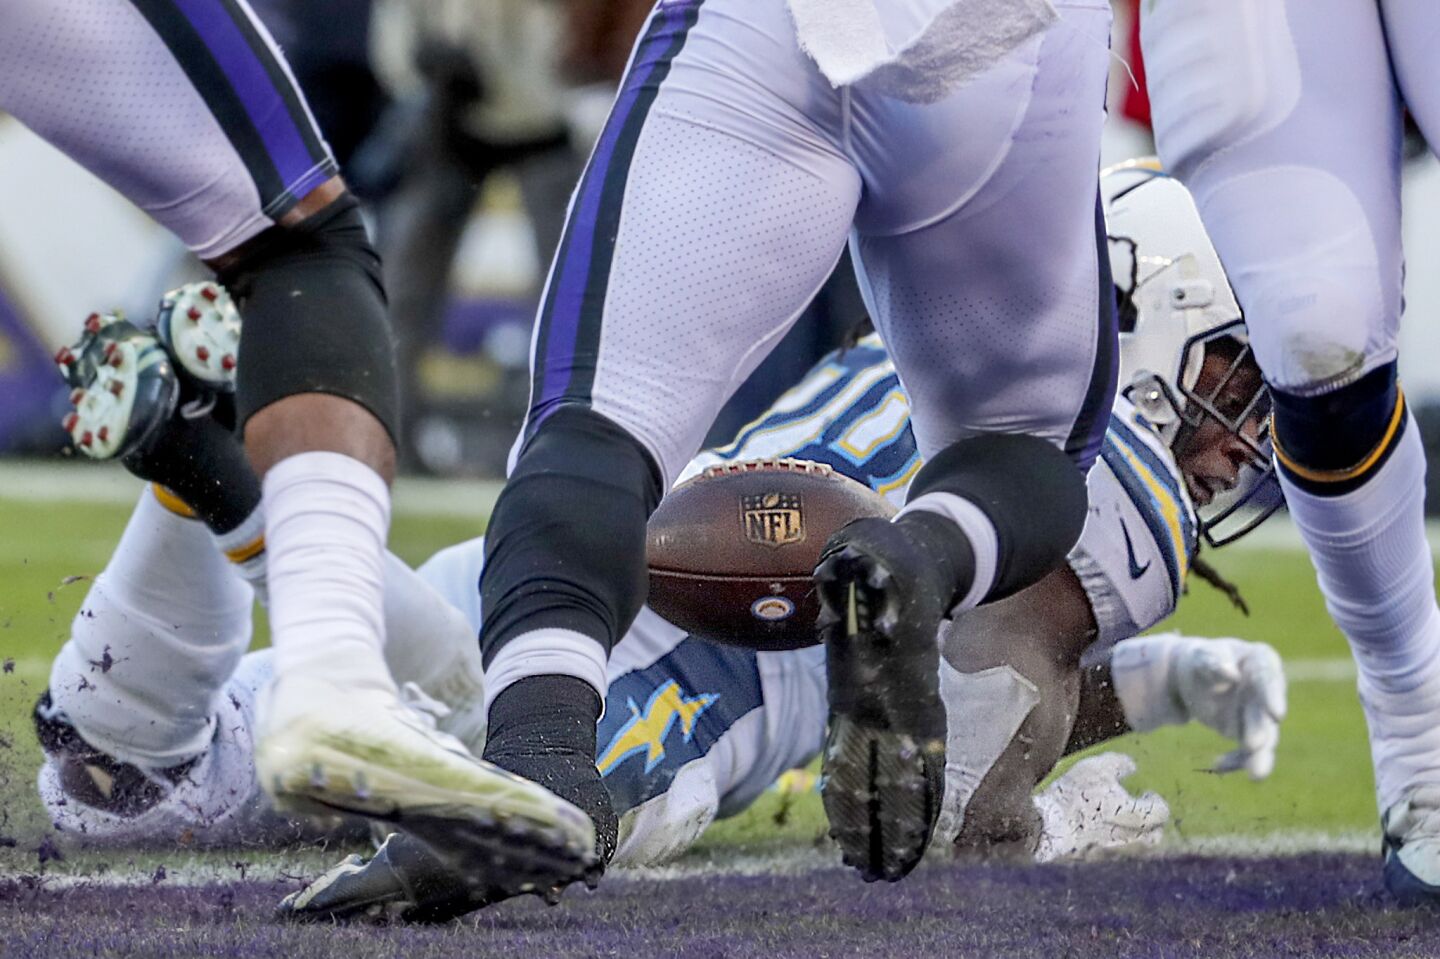 Chargers running back Melvin Gordon loses control of the ball as he dives for the endzone on a fourth-quarter drive. The play was marked just short of the goal line after a booth review.